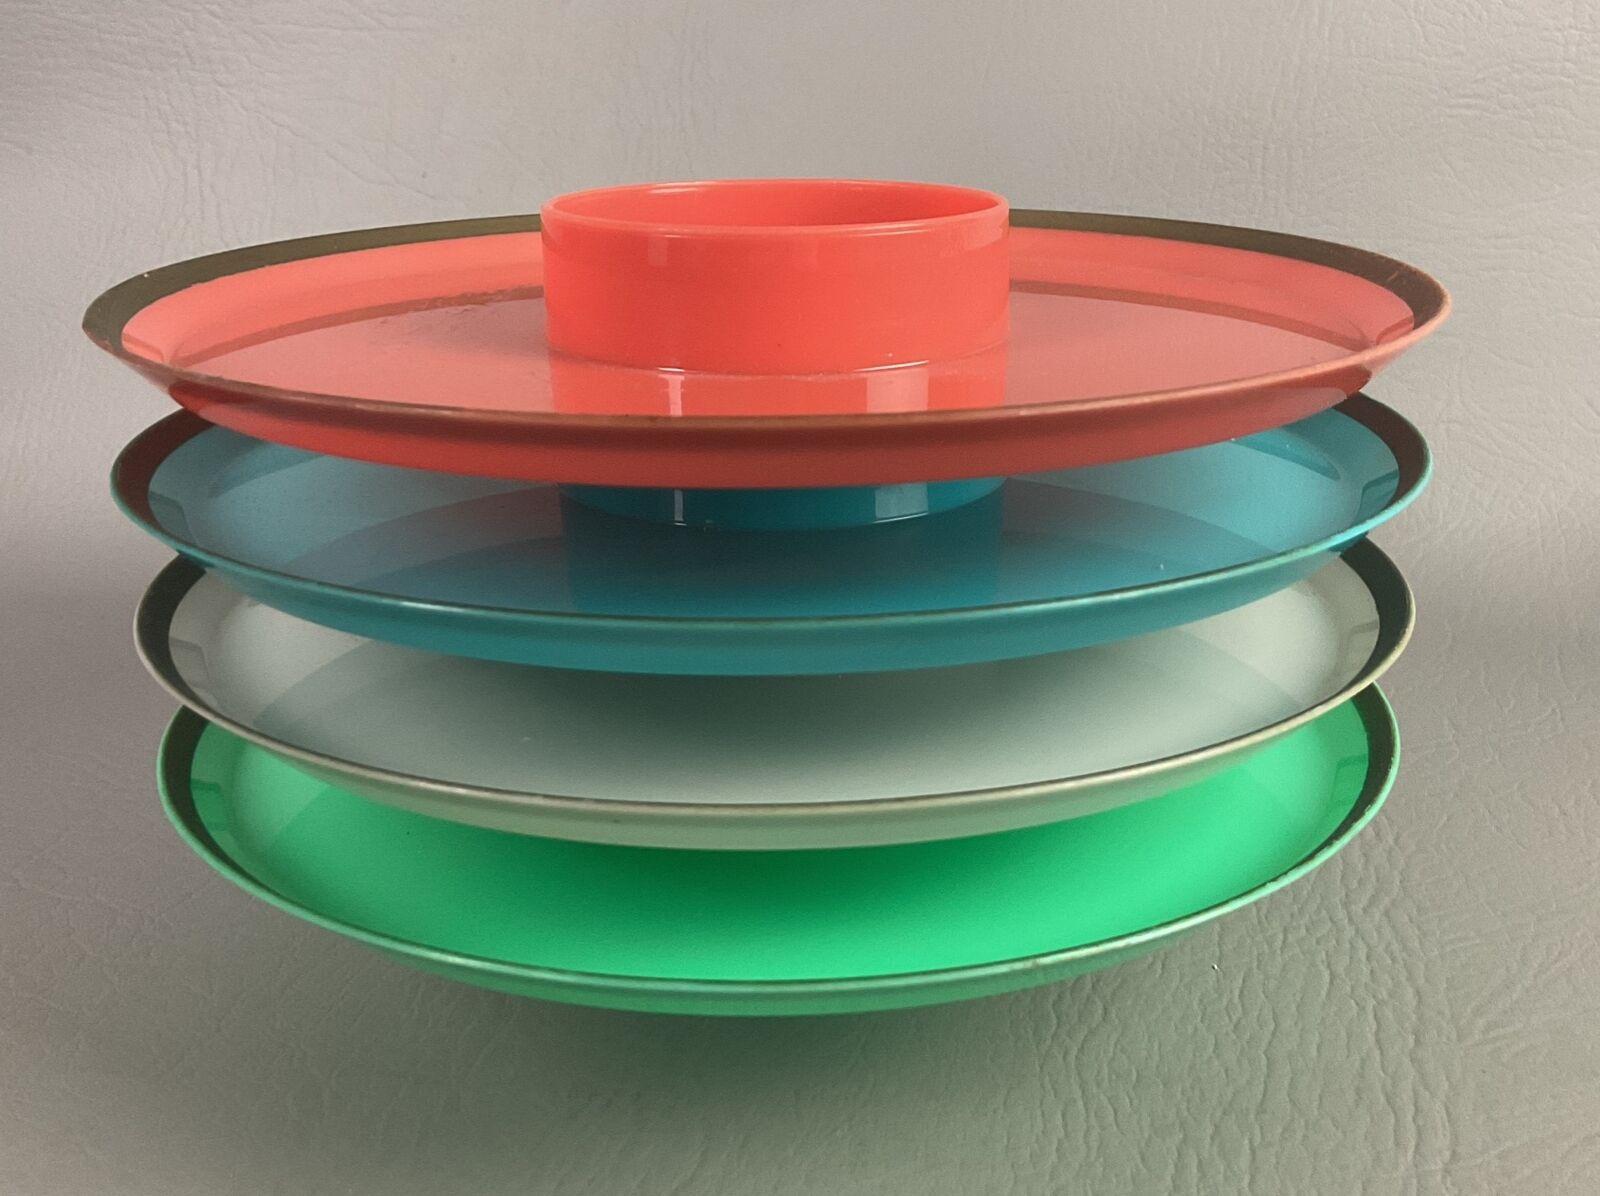 Vintage Hi-Snack Party Plates Serv-Rite Set Of 4 colorful lot 1950s